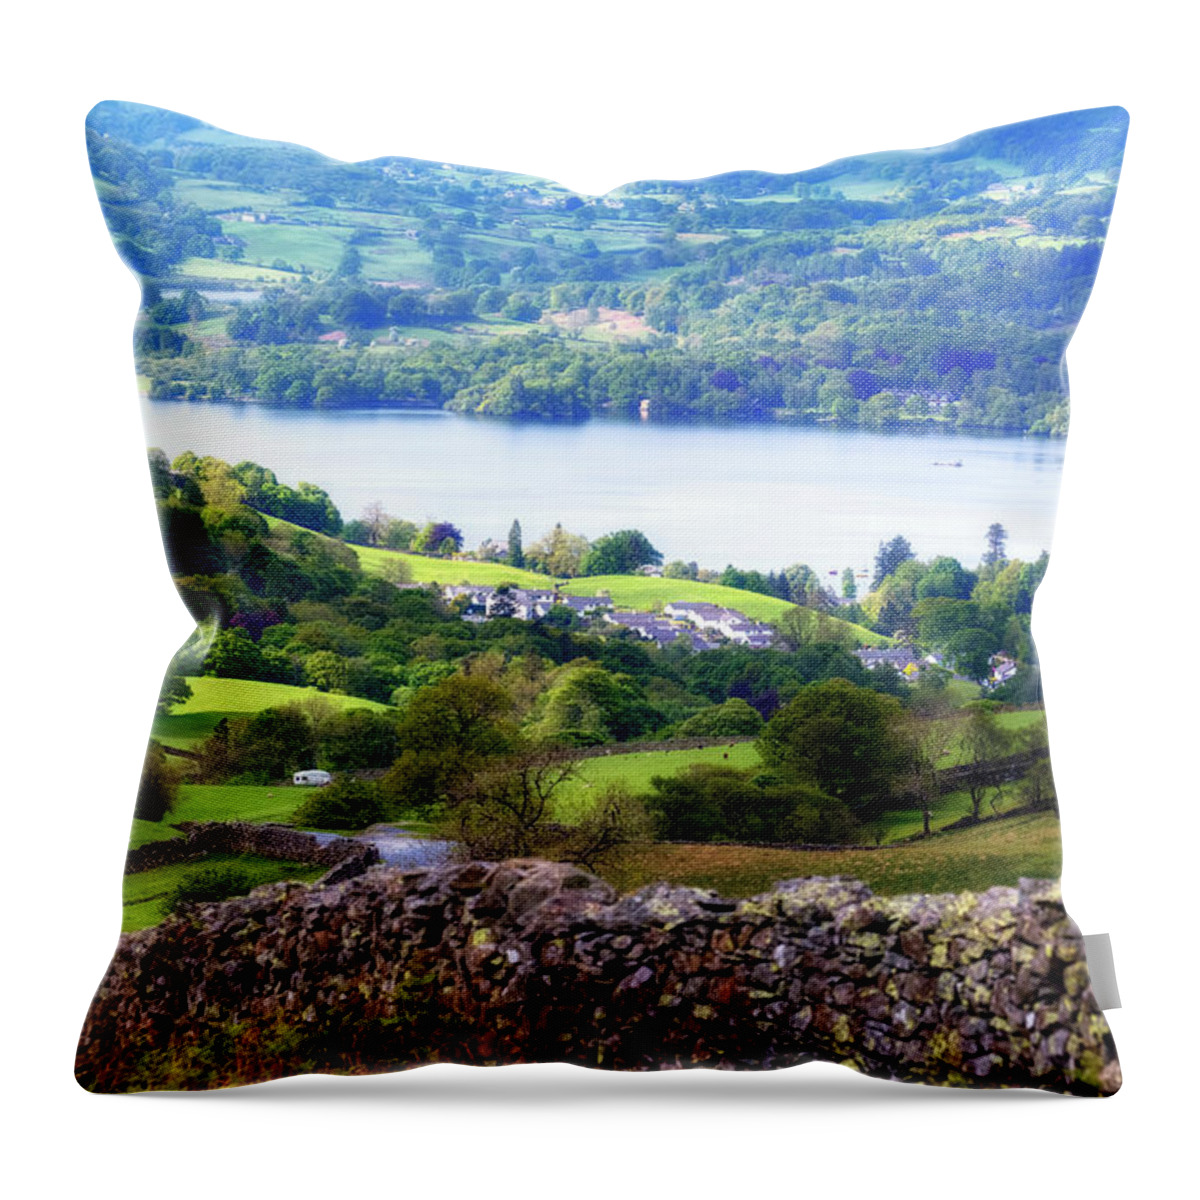 Windermere Throw Pillow featuring the photograph Windermere - Lake District by Joana Kruse